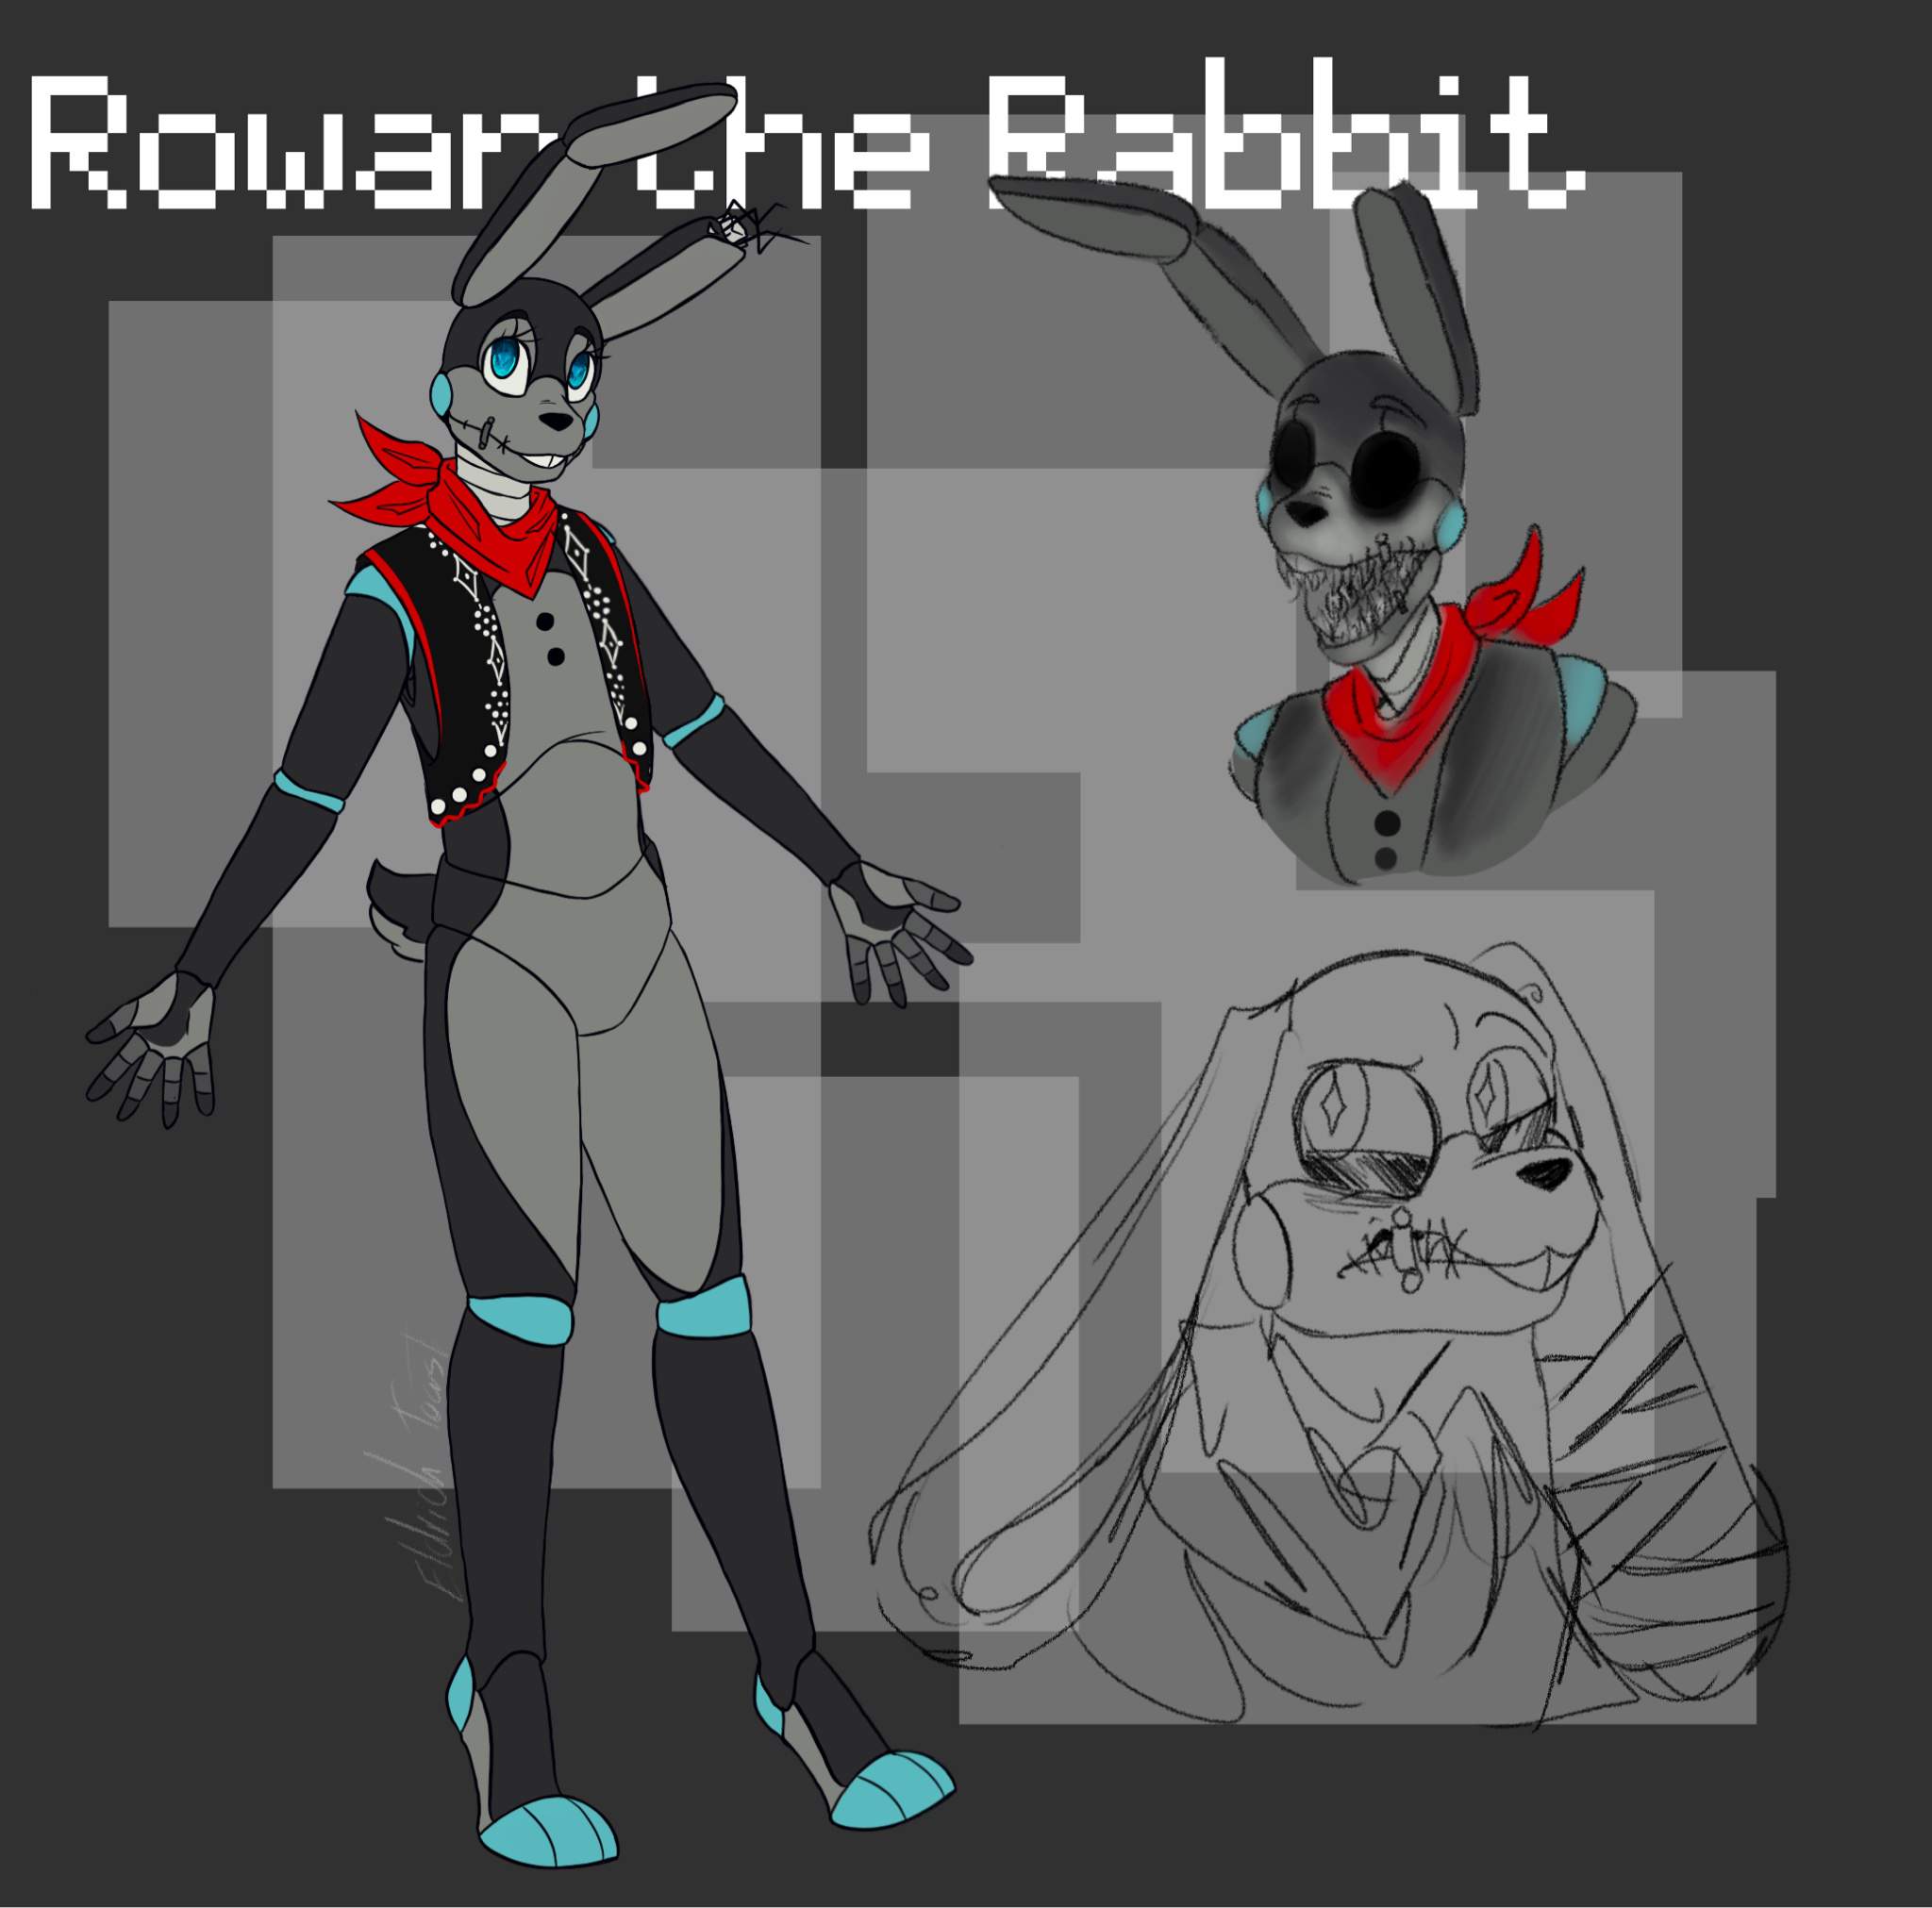 Name Rowan Species Rabbit Style of animatronic n/a, but a hybrid between ro...